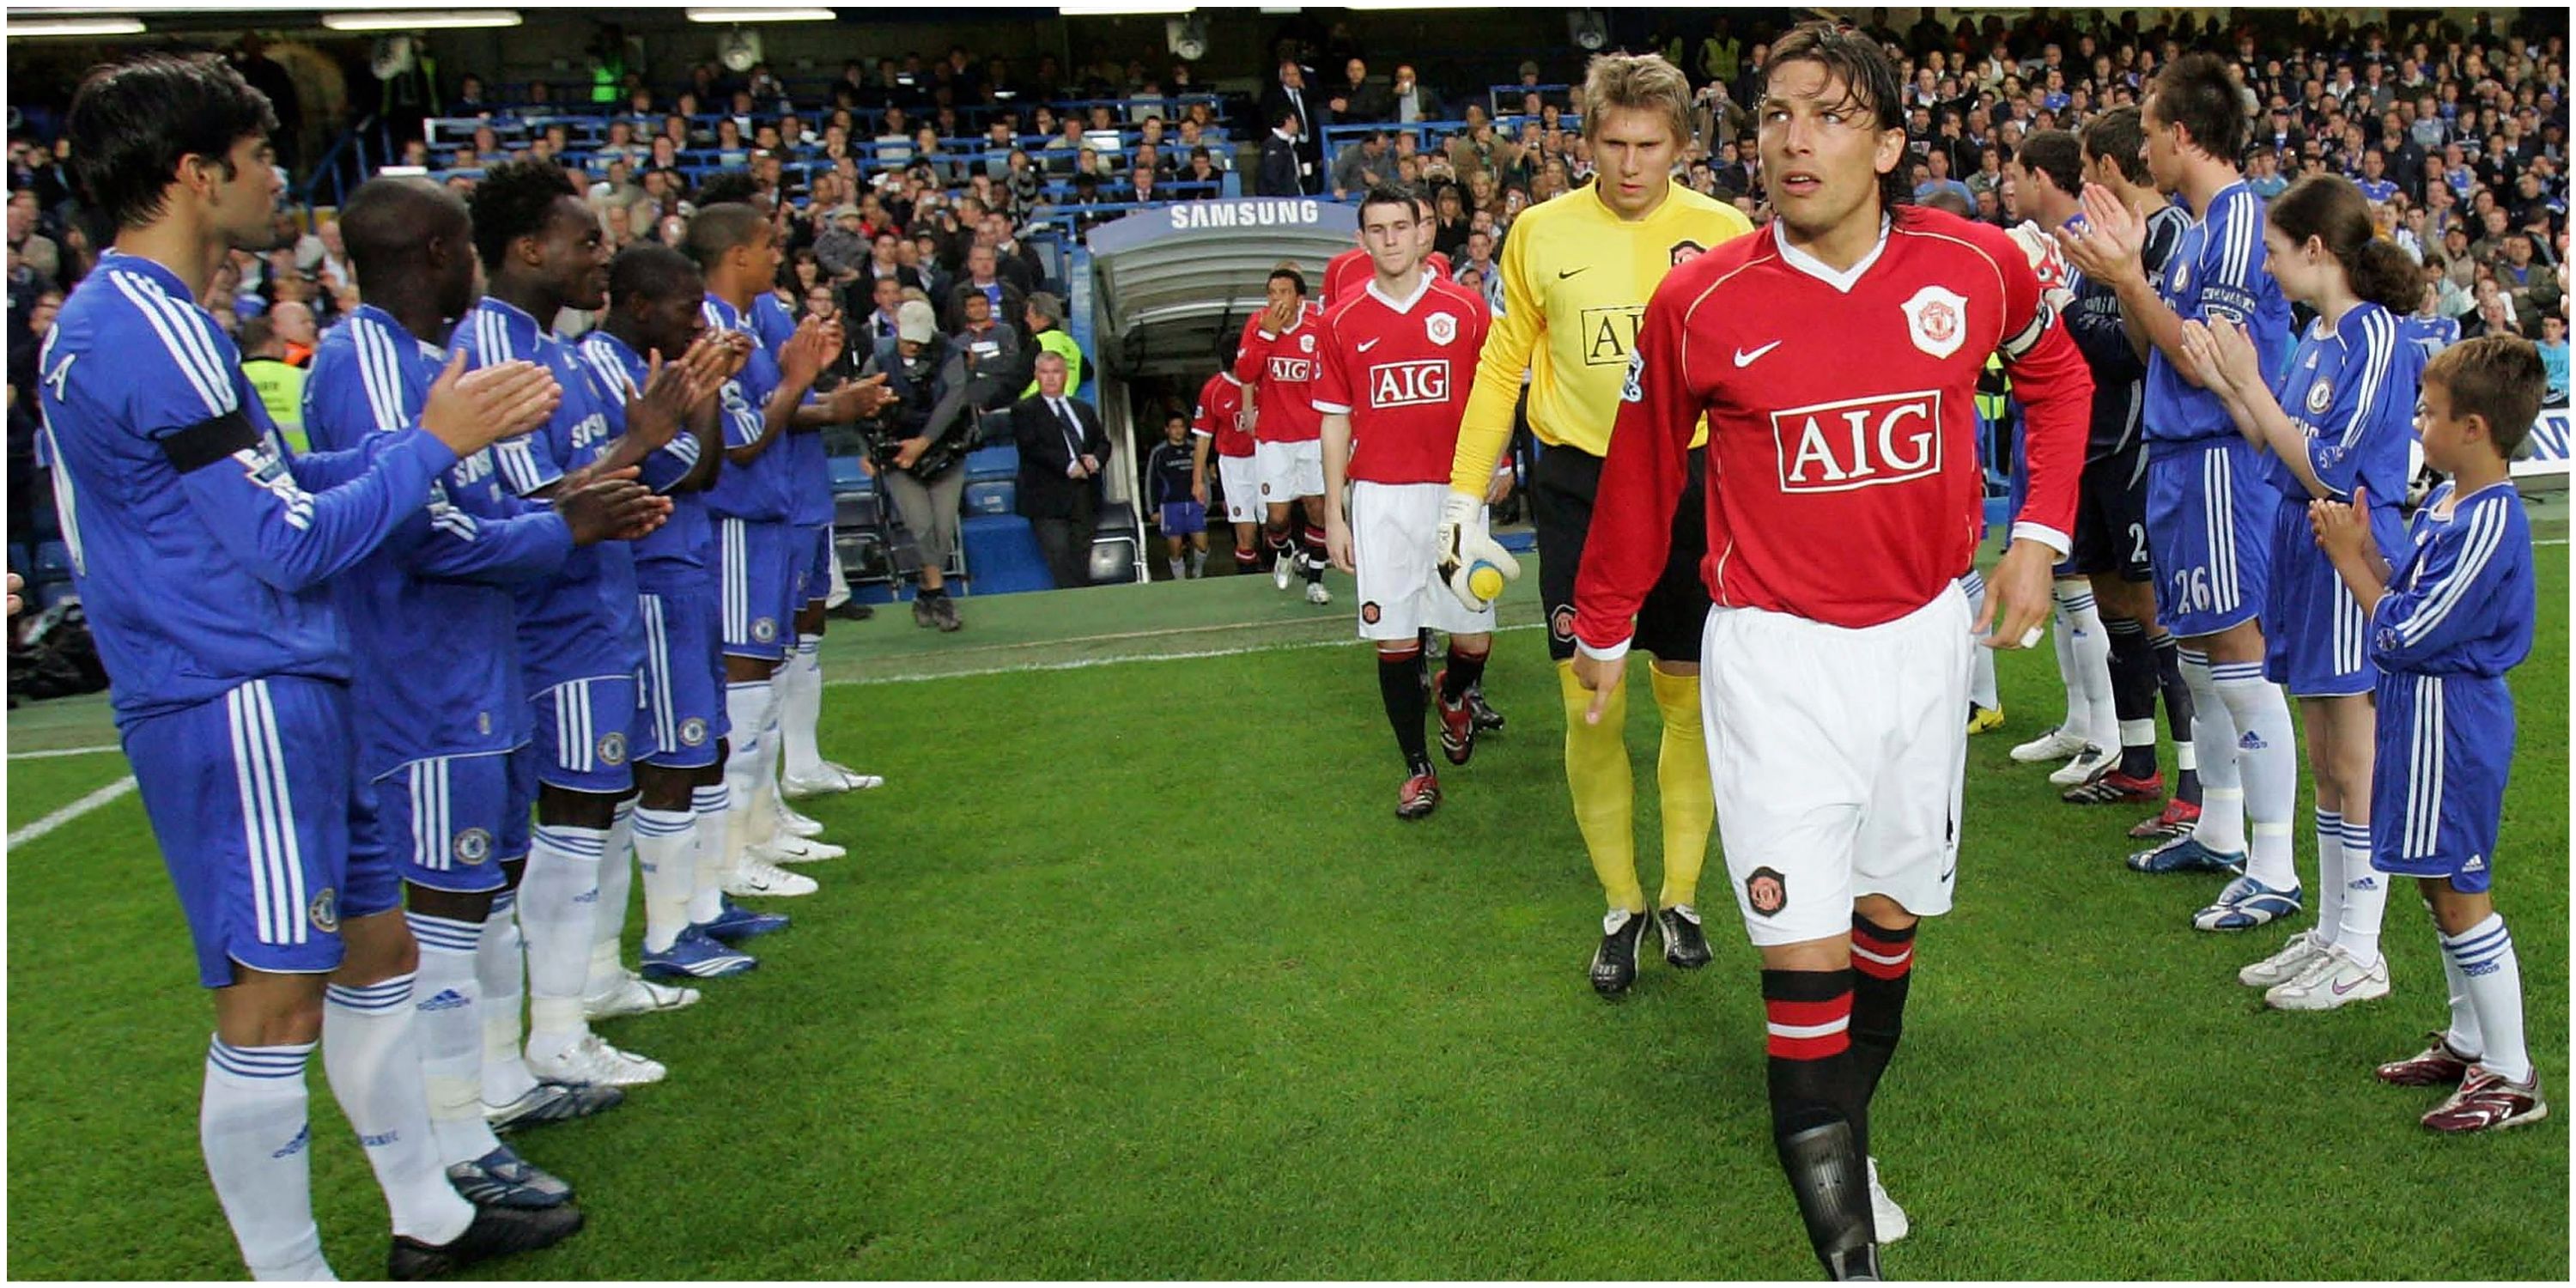 Man Utd’s bizarre XI that received 2007 guard of honour from Chelsea - What happened to them?